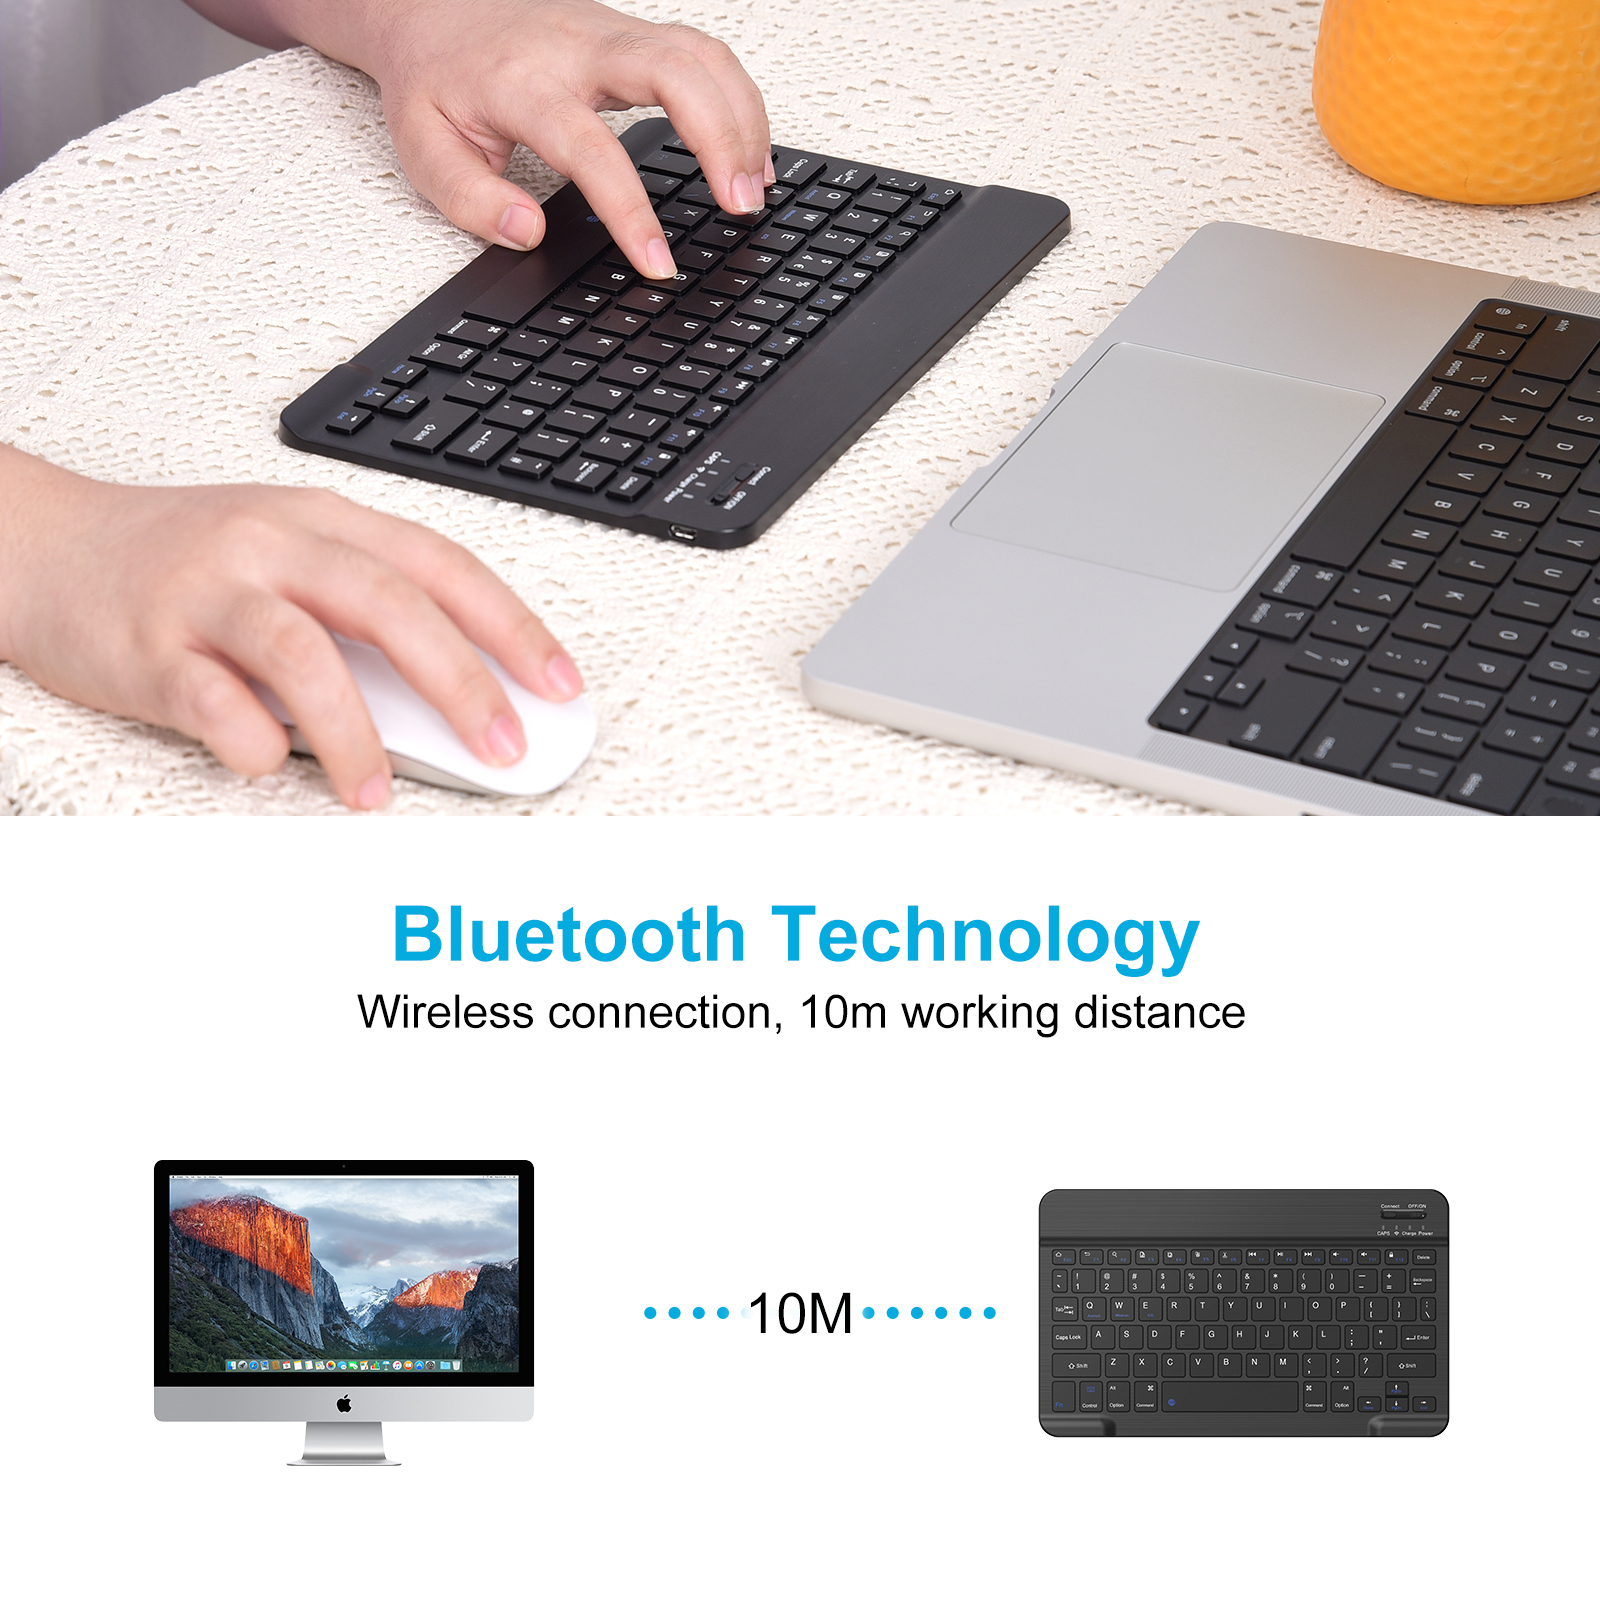 Cimetech Bluetooth Keyboard, Ultra-Slim Wireless Keyboard Quiet Portable Design with Built-in Rechargeable Battery for IOS, Mac, iPad, Windows and Android 3.0 and Above OS Black - image 3 of 8